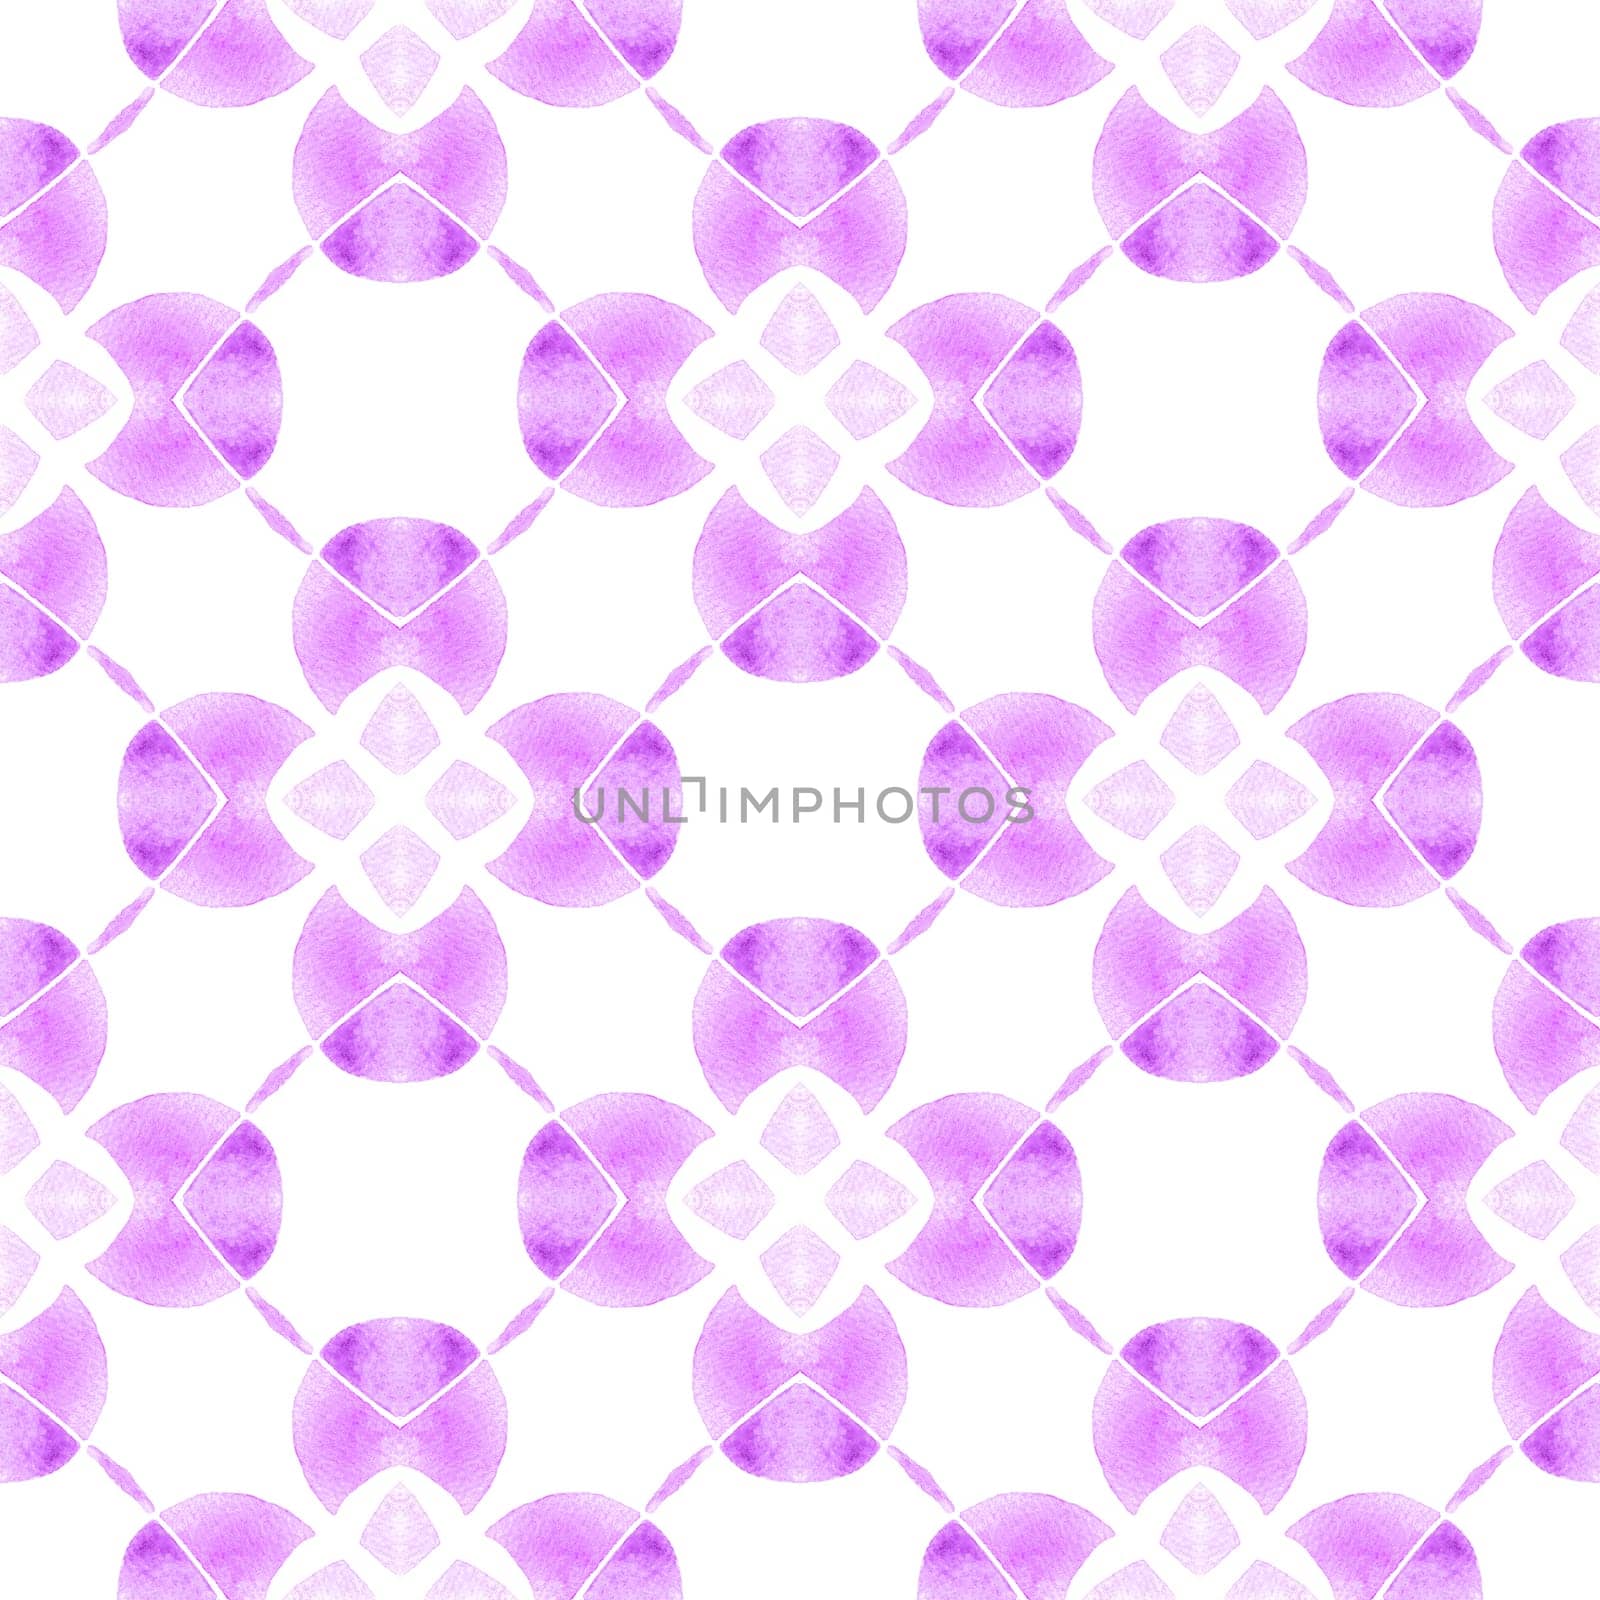 Watercolor ikat repeating tile border. Purple classic boho chic summer design. Textile ready lively print, swimwear fabric, wallpaper, wrapping. Ikat repeating swimwear design.